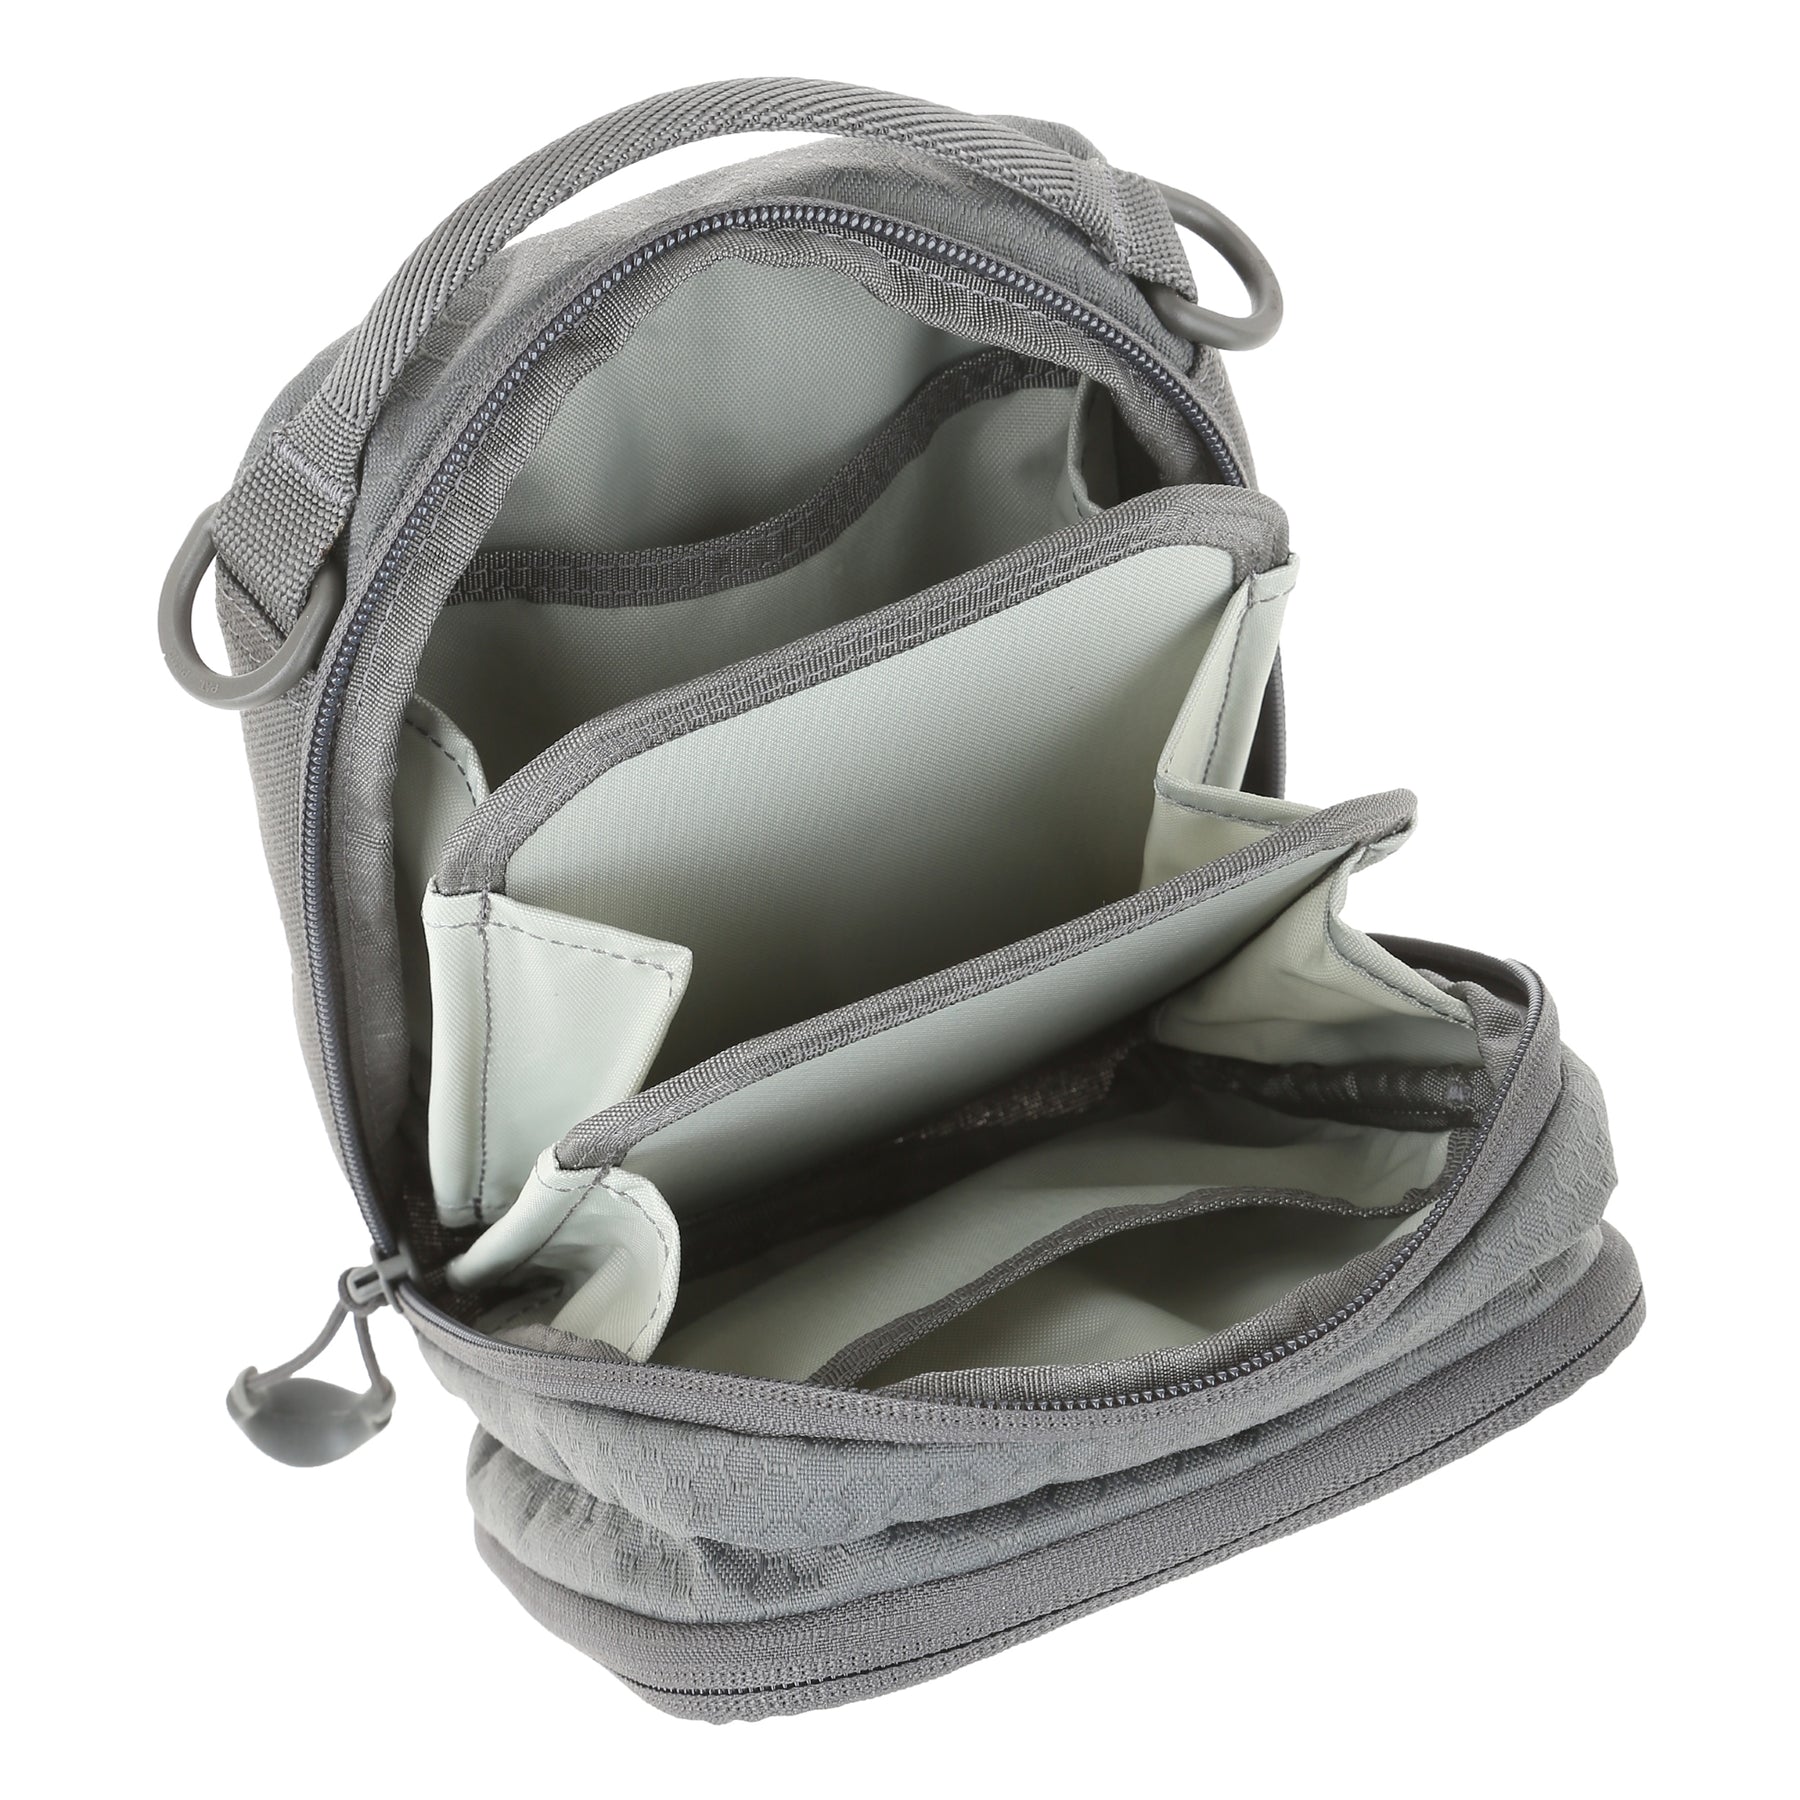 MAXPEDITION | AGR AUP ACCORDION UTILITY POUCH